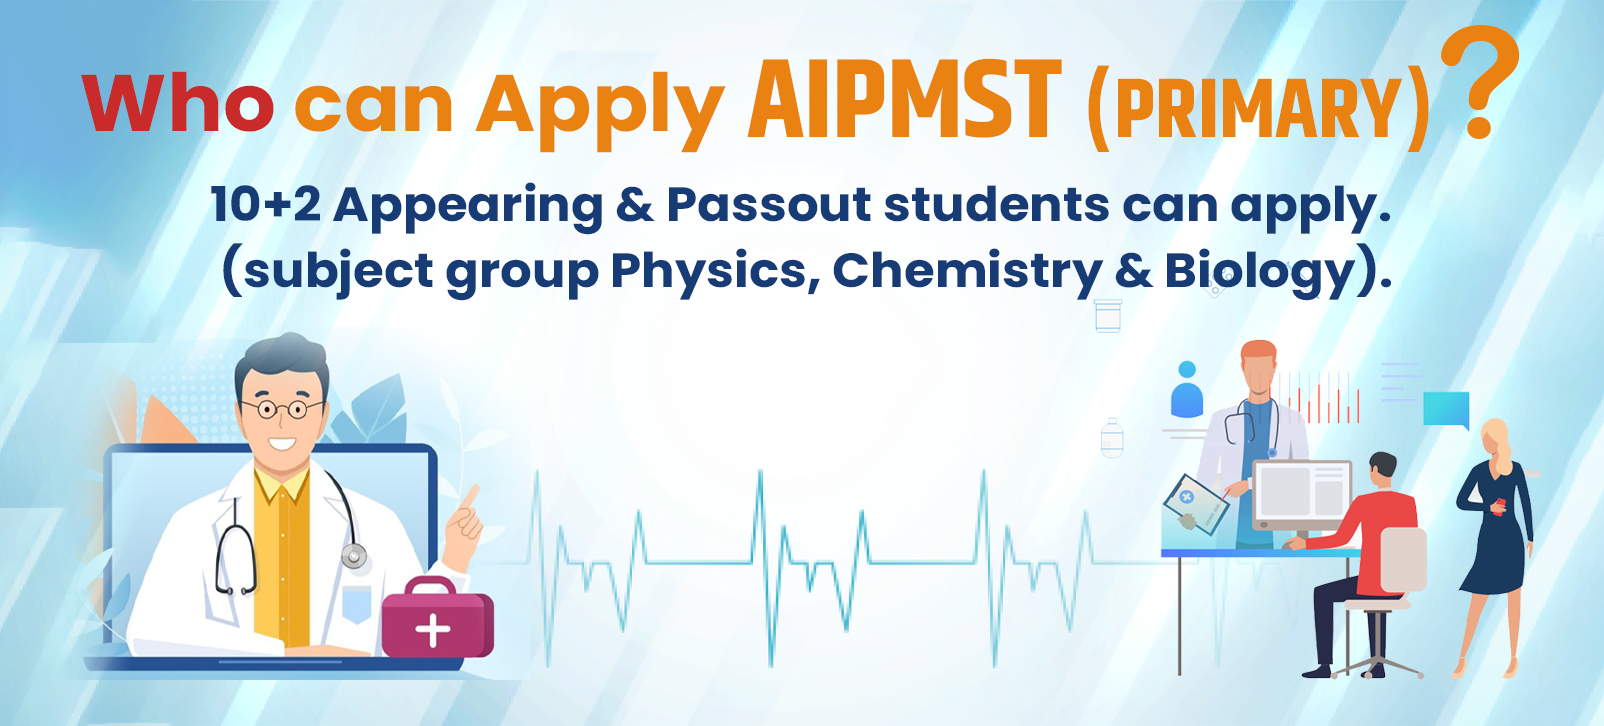 AIPMST (PRIMARY)